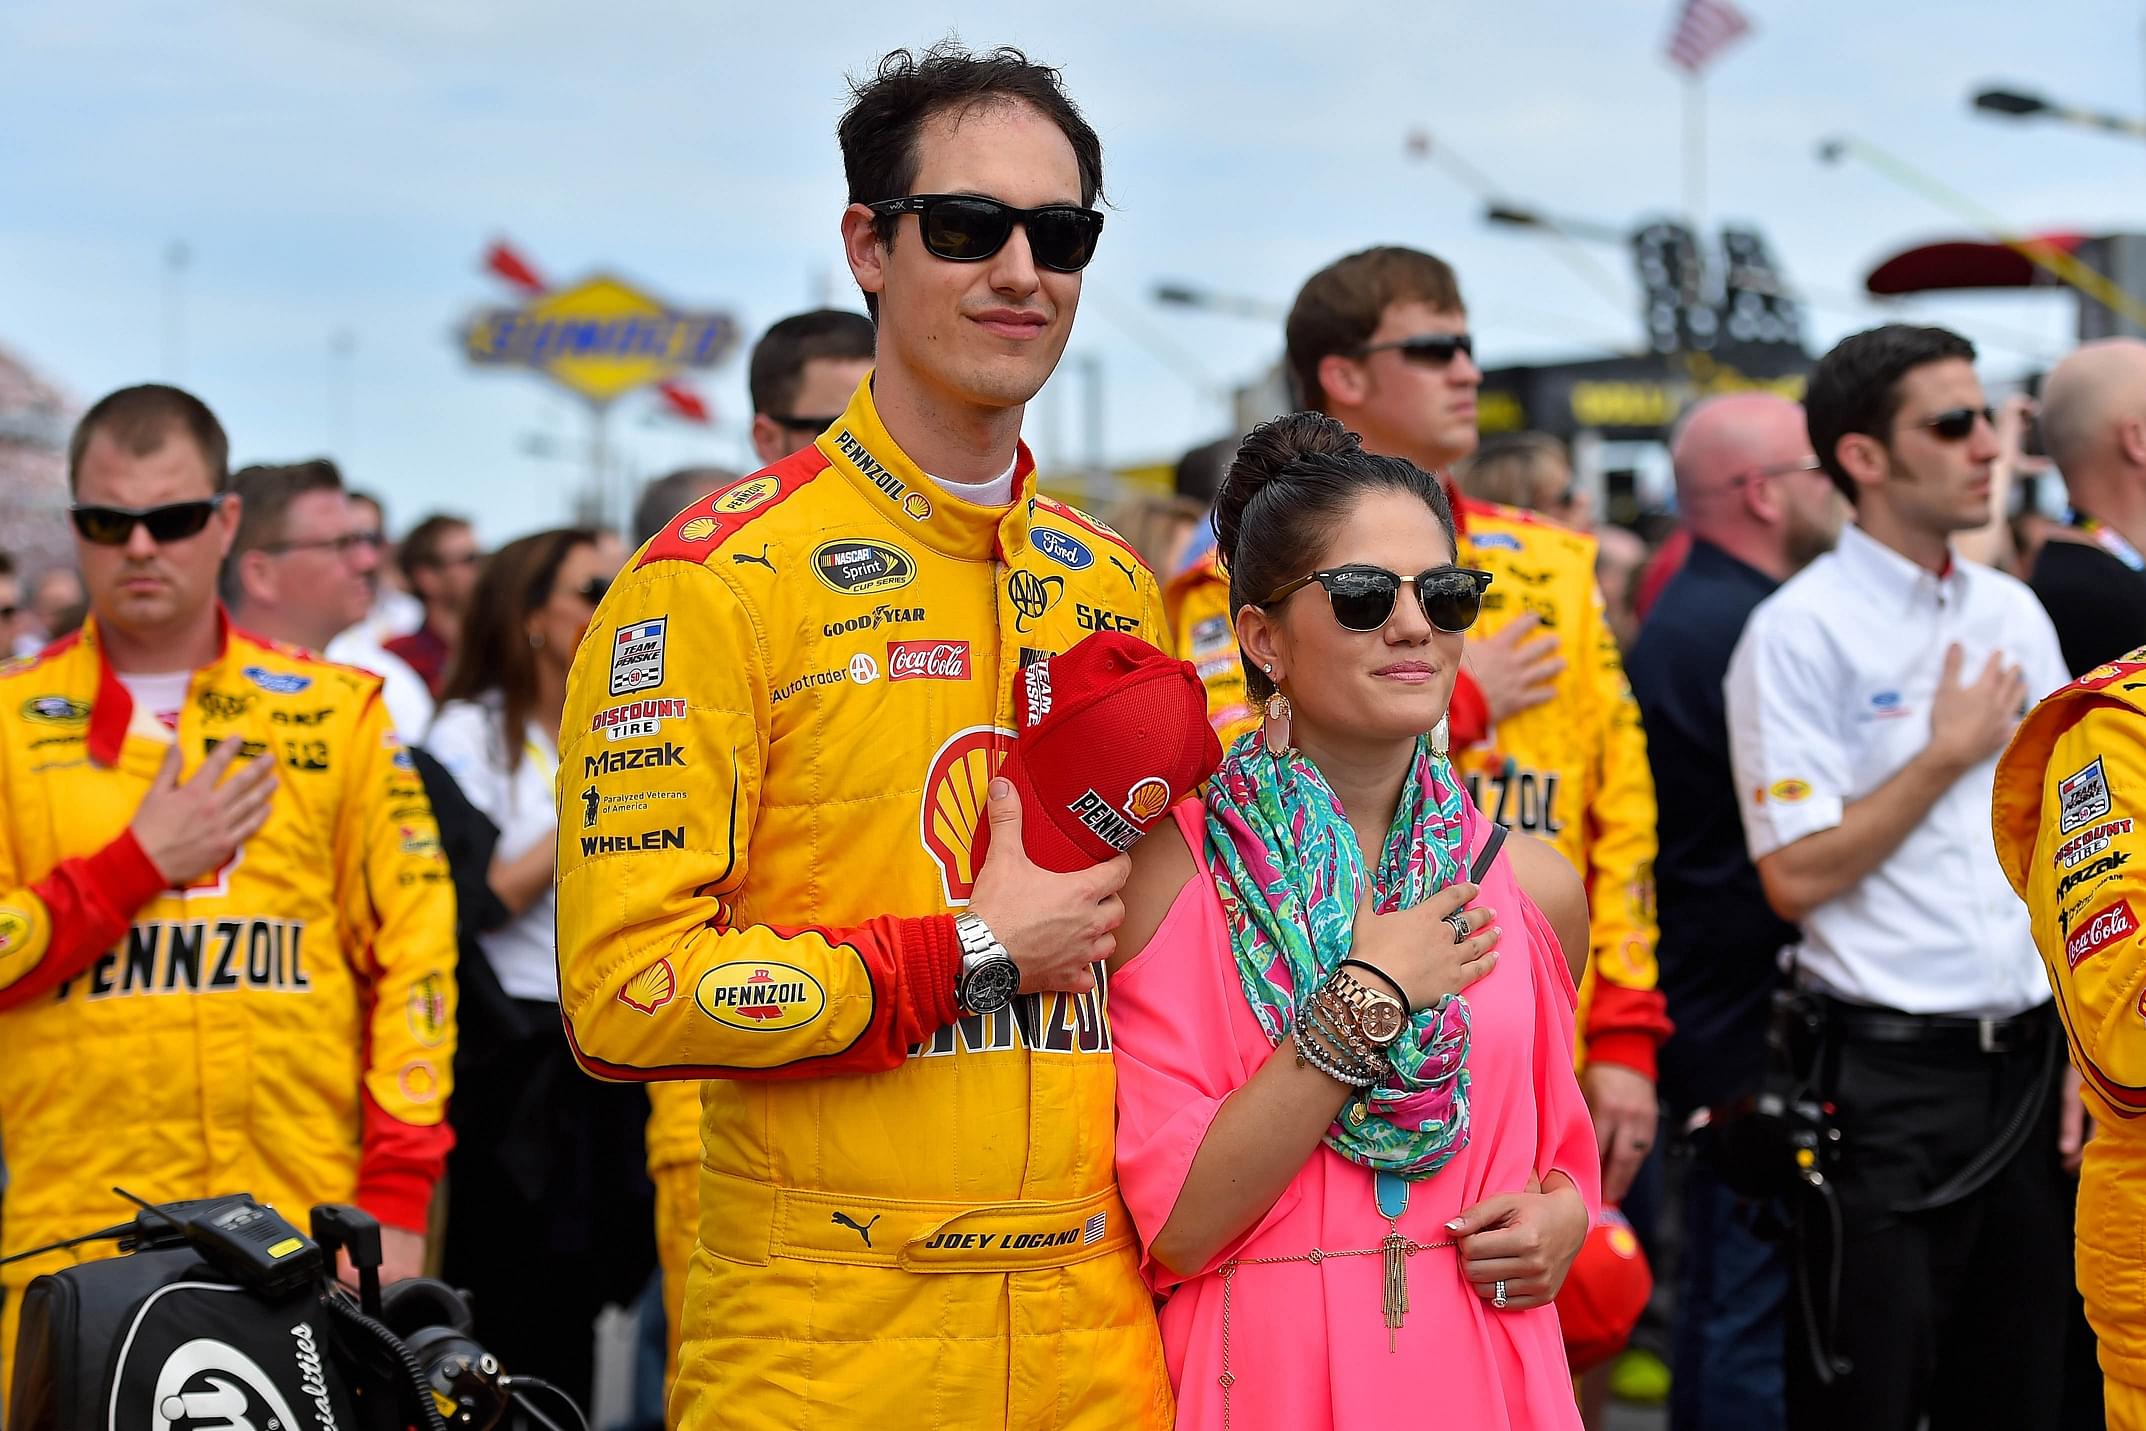 When Tragedy Forced Joey Logano’s Wife to Recognize Him as “An Awesome Dad”